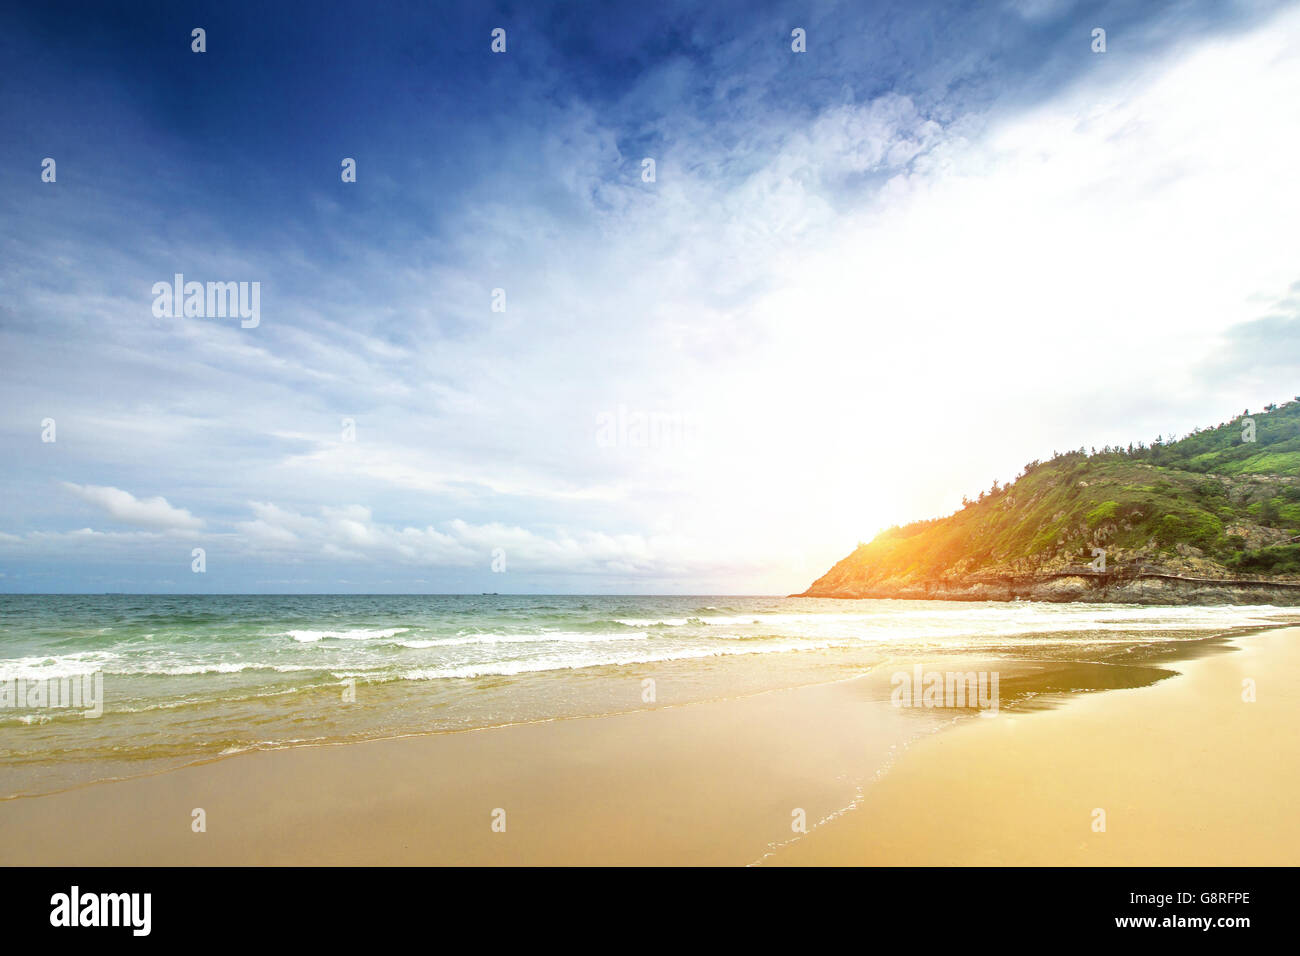 The natural scenery of the sea beach Stock Photo